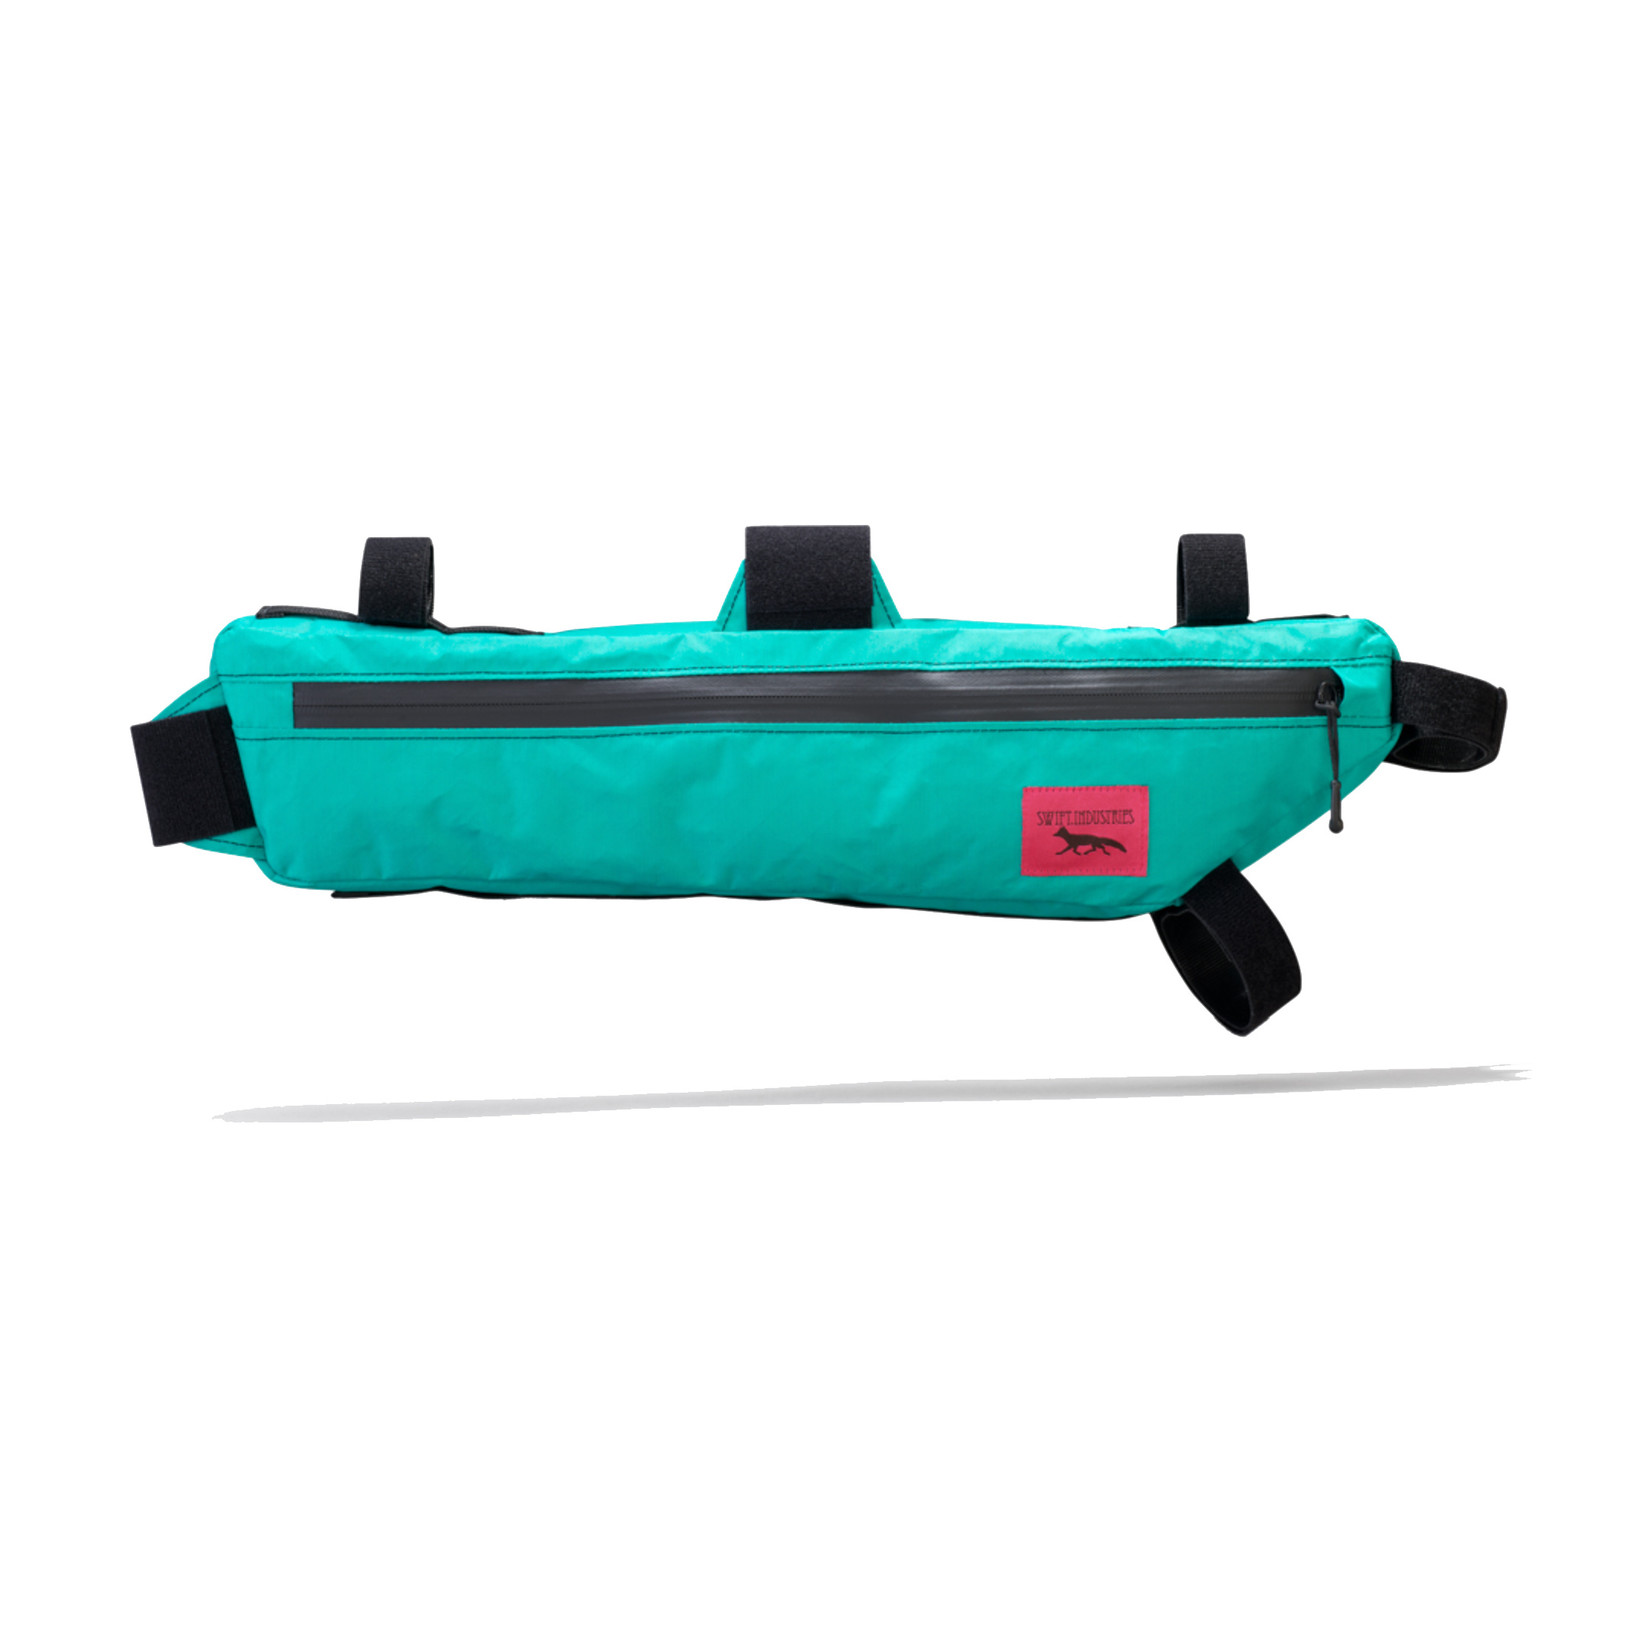 Swift Industries Hold Fast Frame Bag